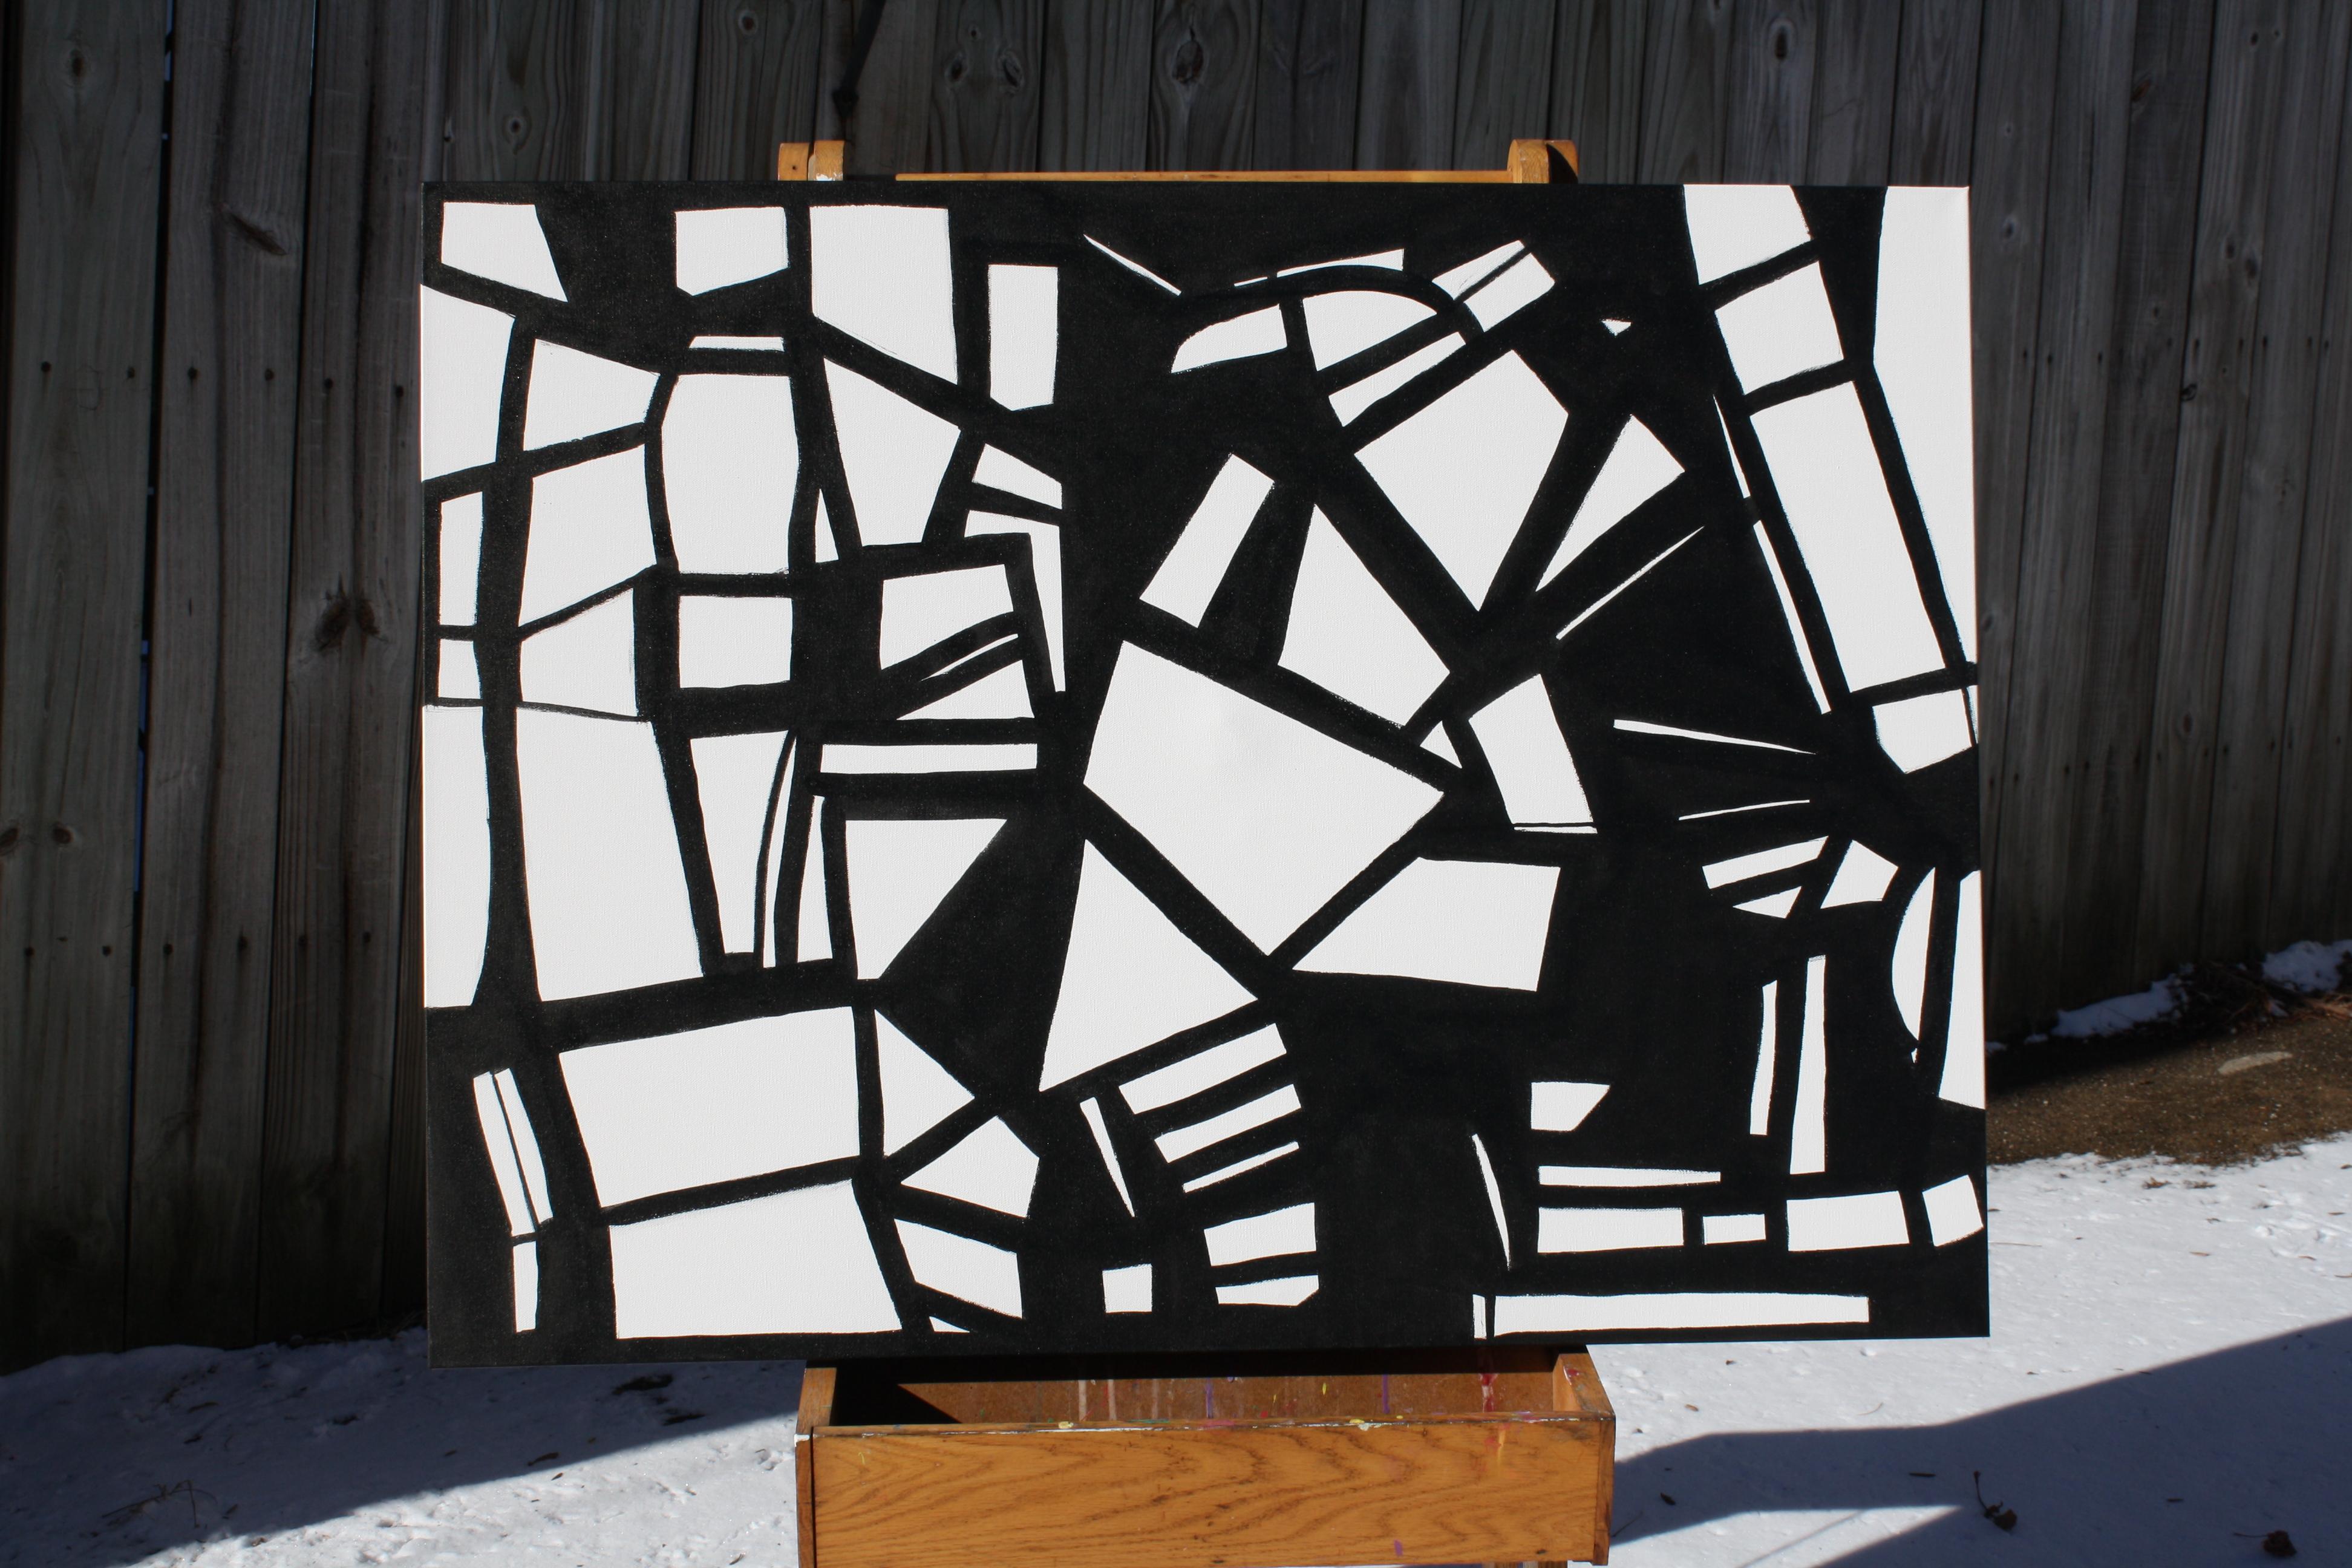 <p>Artist Comments<br>This abstract artwork explores the formation of complex shapes, focusing on movements and contrasts. Unique patterns emerge from the deliberate arrangement of forms and colors. The composition invites the viewer to an open